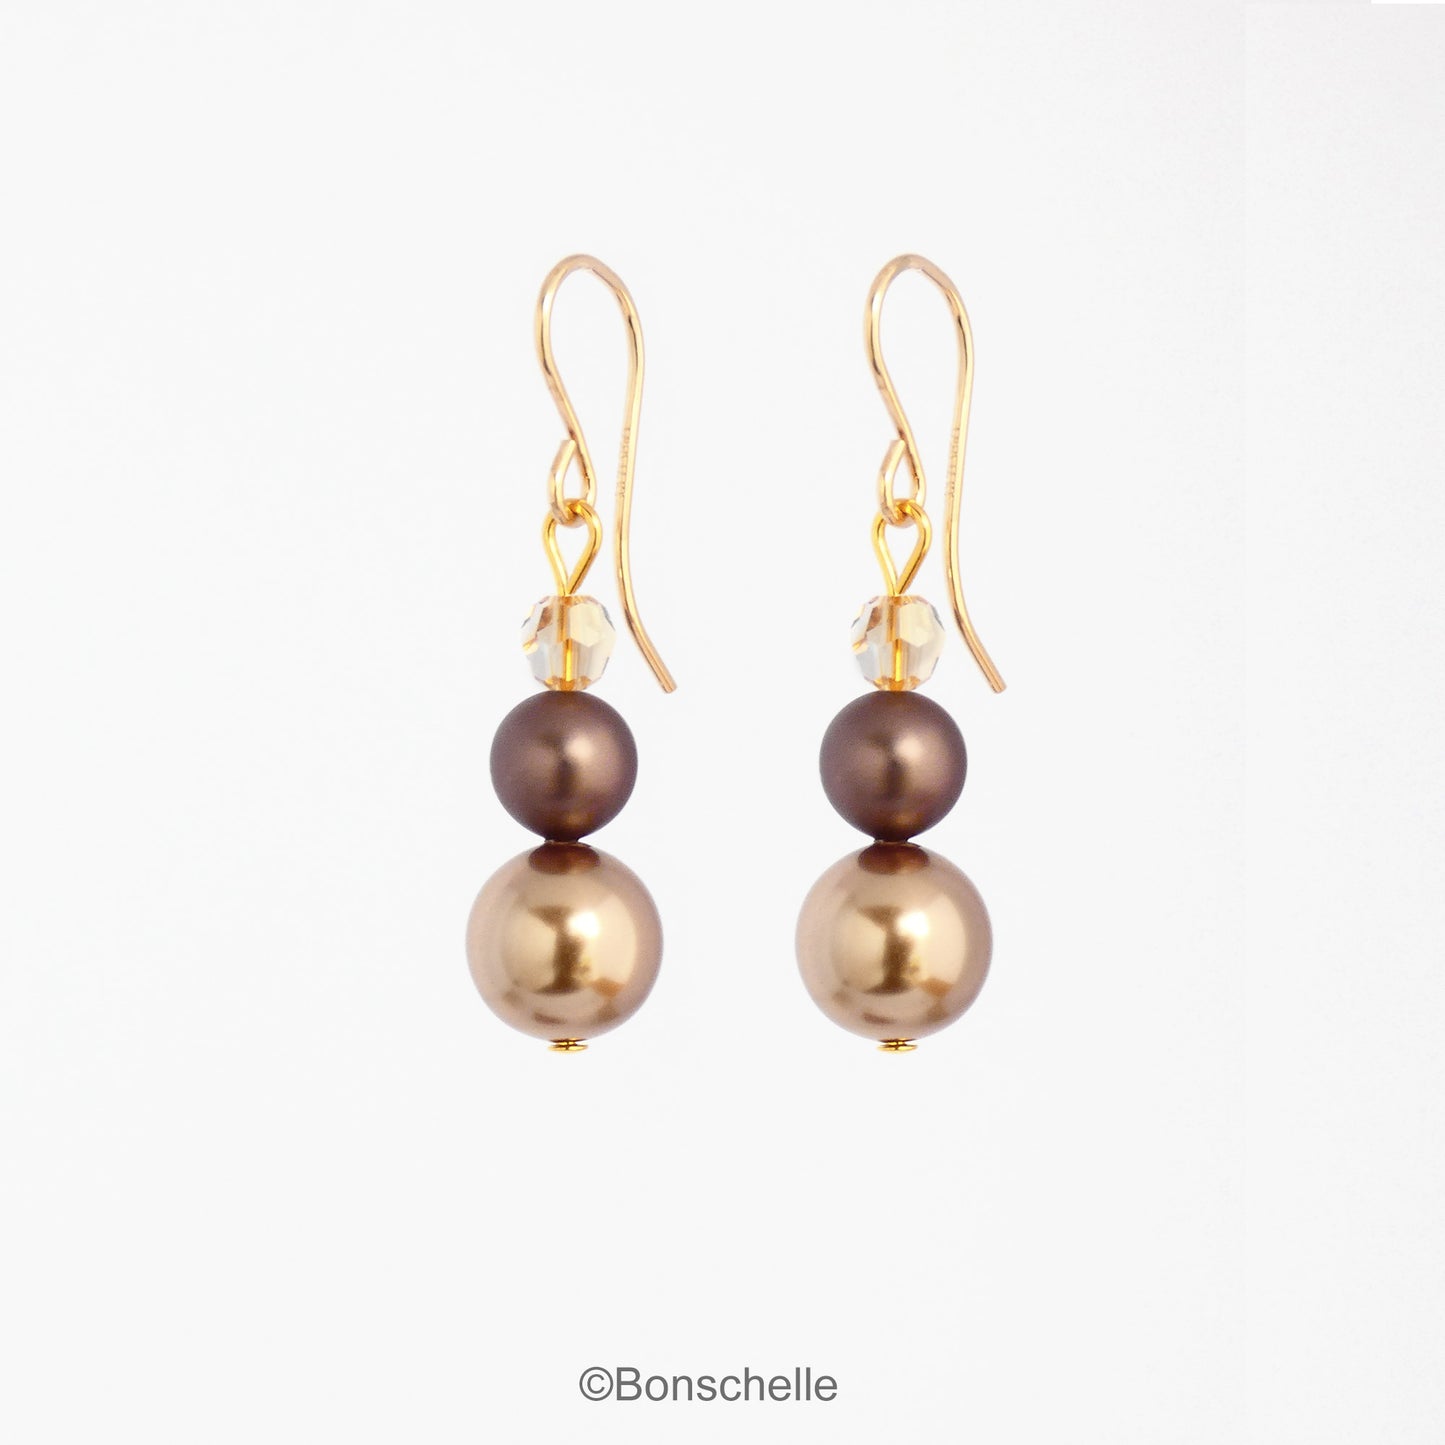 Light and dark bronze pearl earrings with 14K gold filled earwires for women